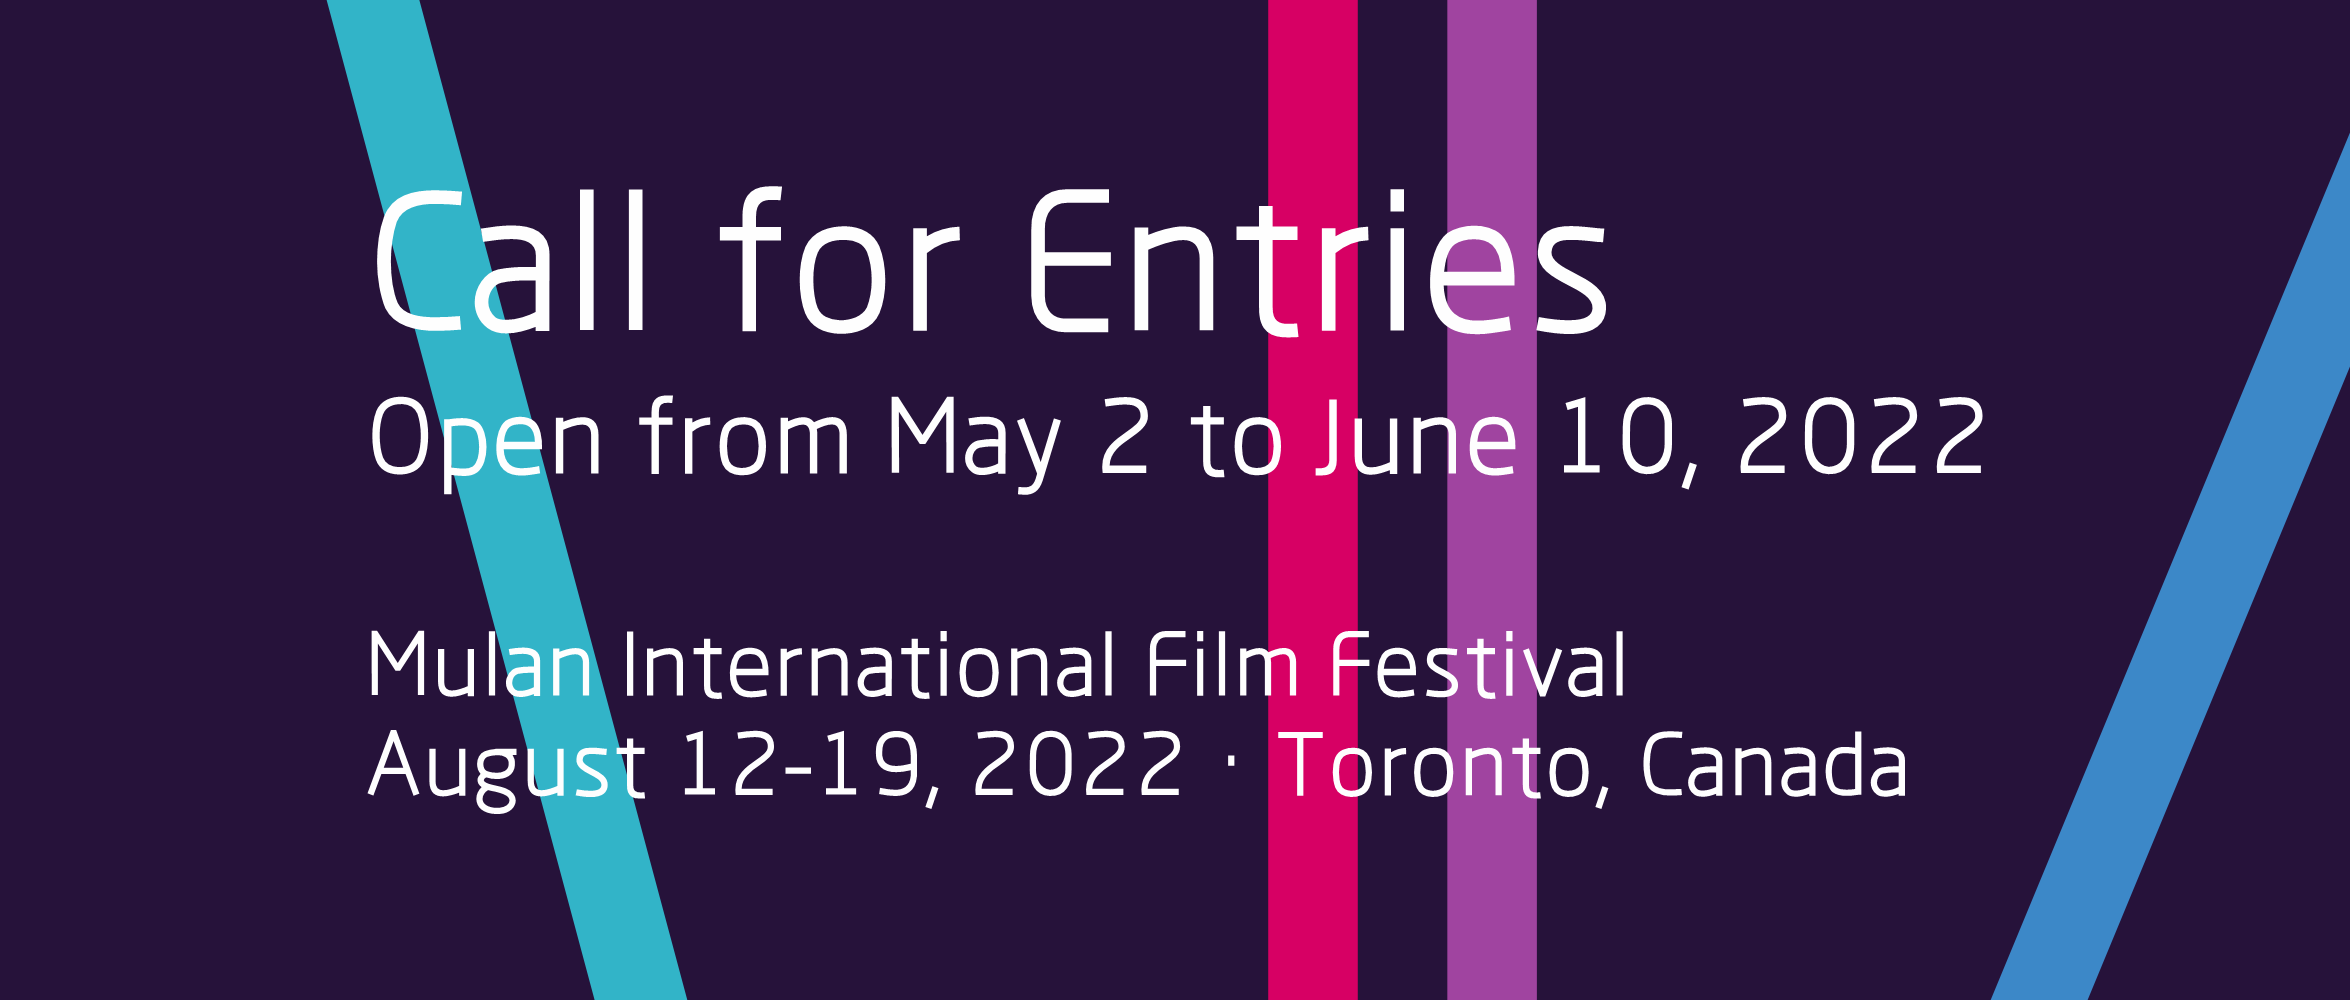 Call for Entries - Open from May 2 to June 10, 2022 - August 12-19, 2022 - Toronto, Canada - Mulan International Film Festival